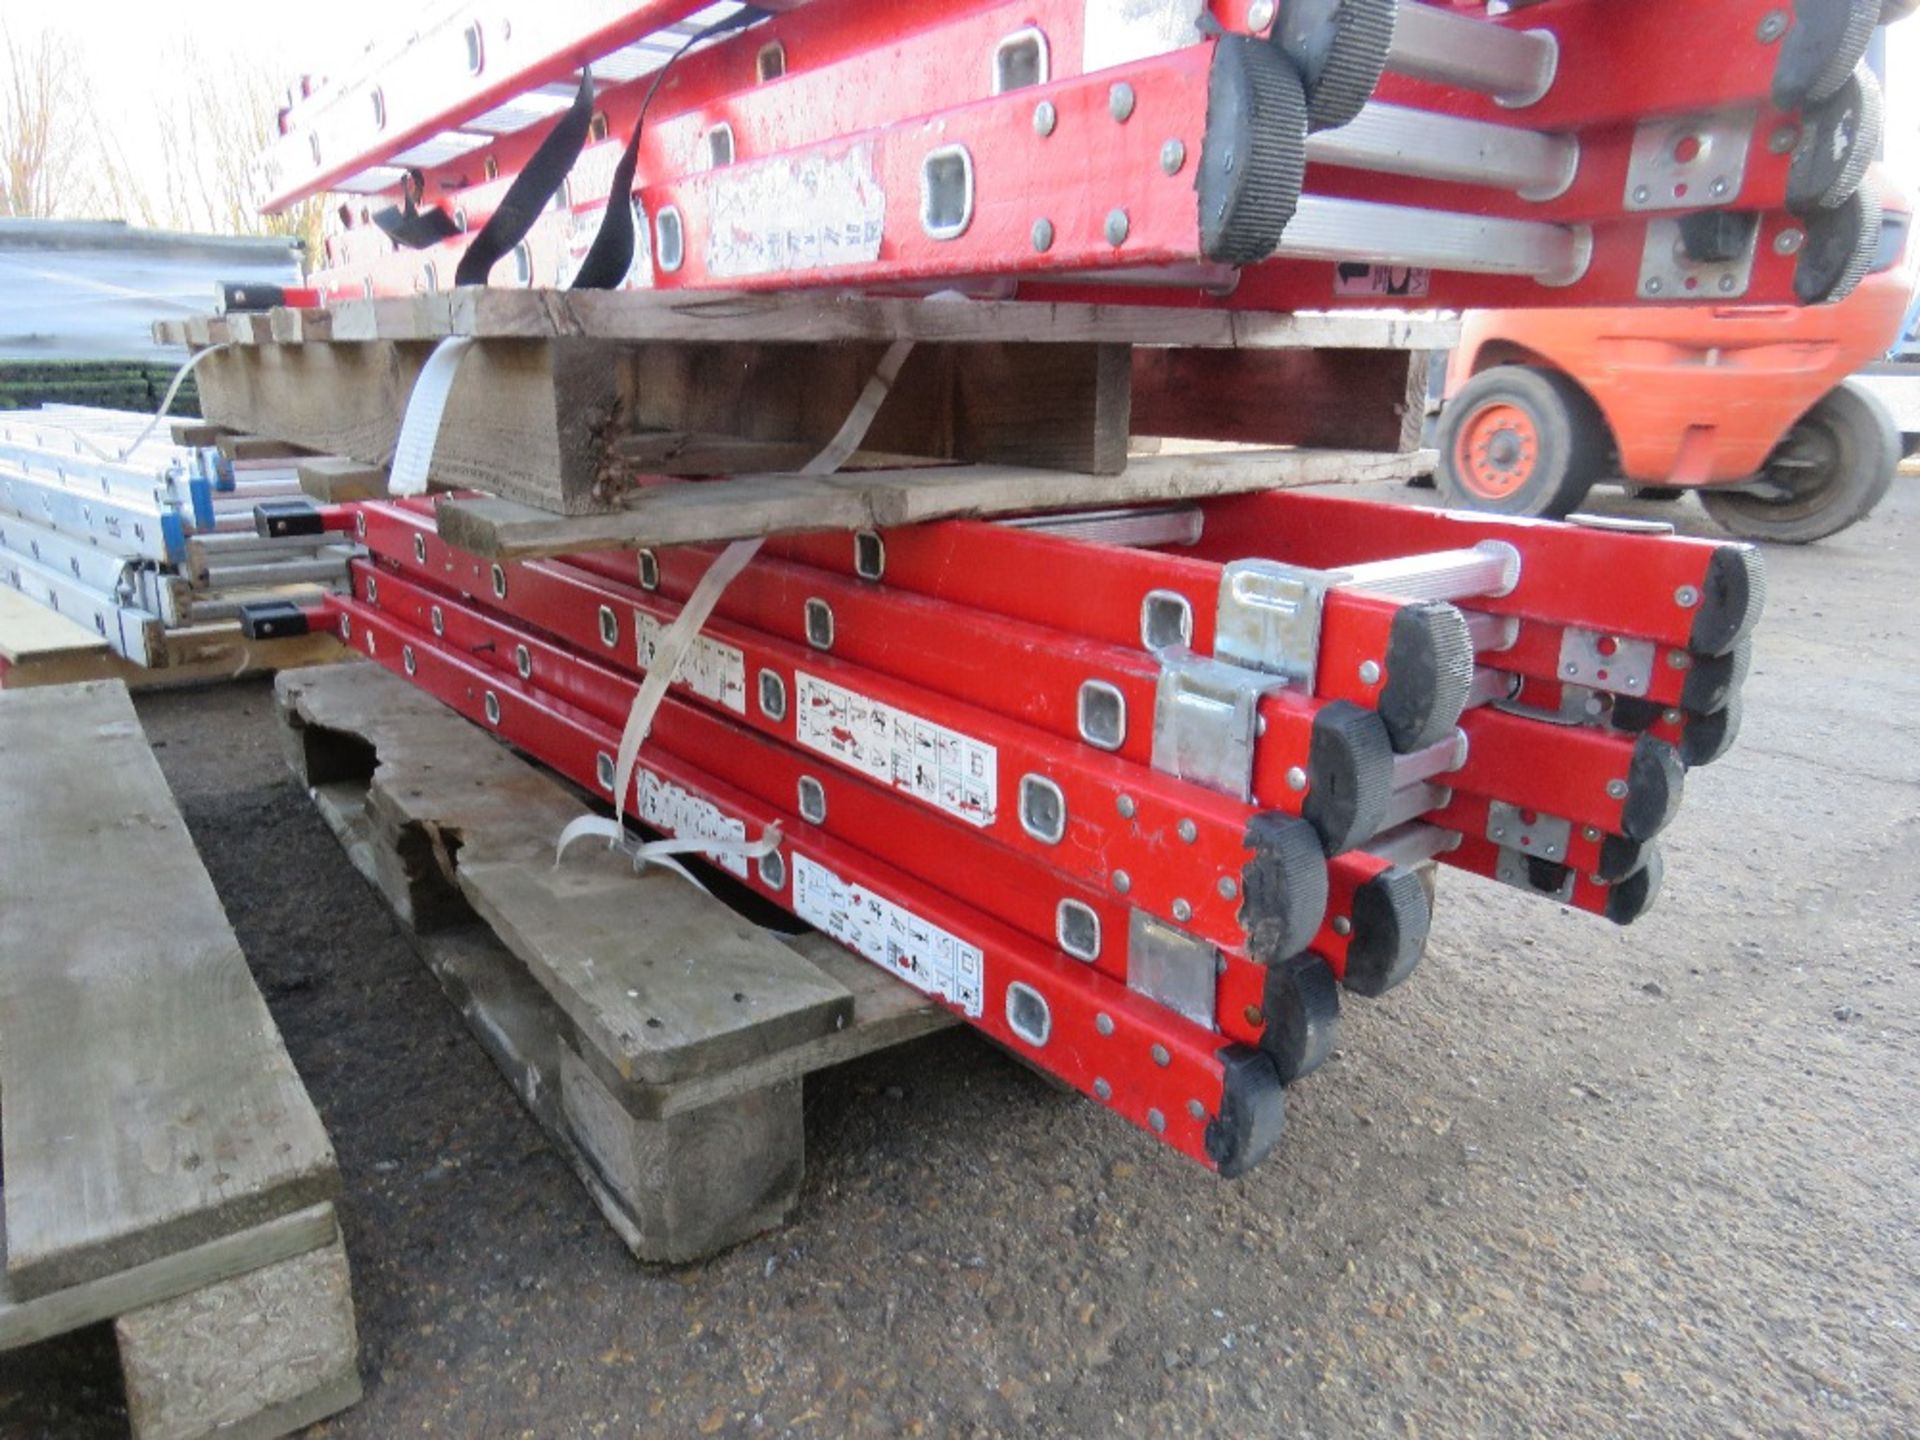 2 X GRP 3 STAGE LADDERS, 1.65M CLOSED LENGTH APPROX. THIS LOT IS SOLD UNDER THE AUCTIONEERS MARGIN S - Image 2 of 2